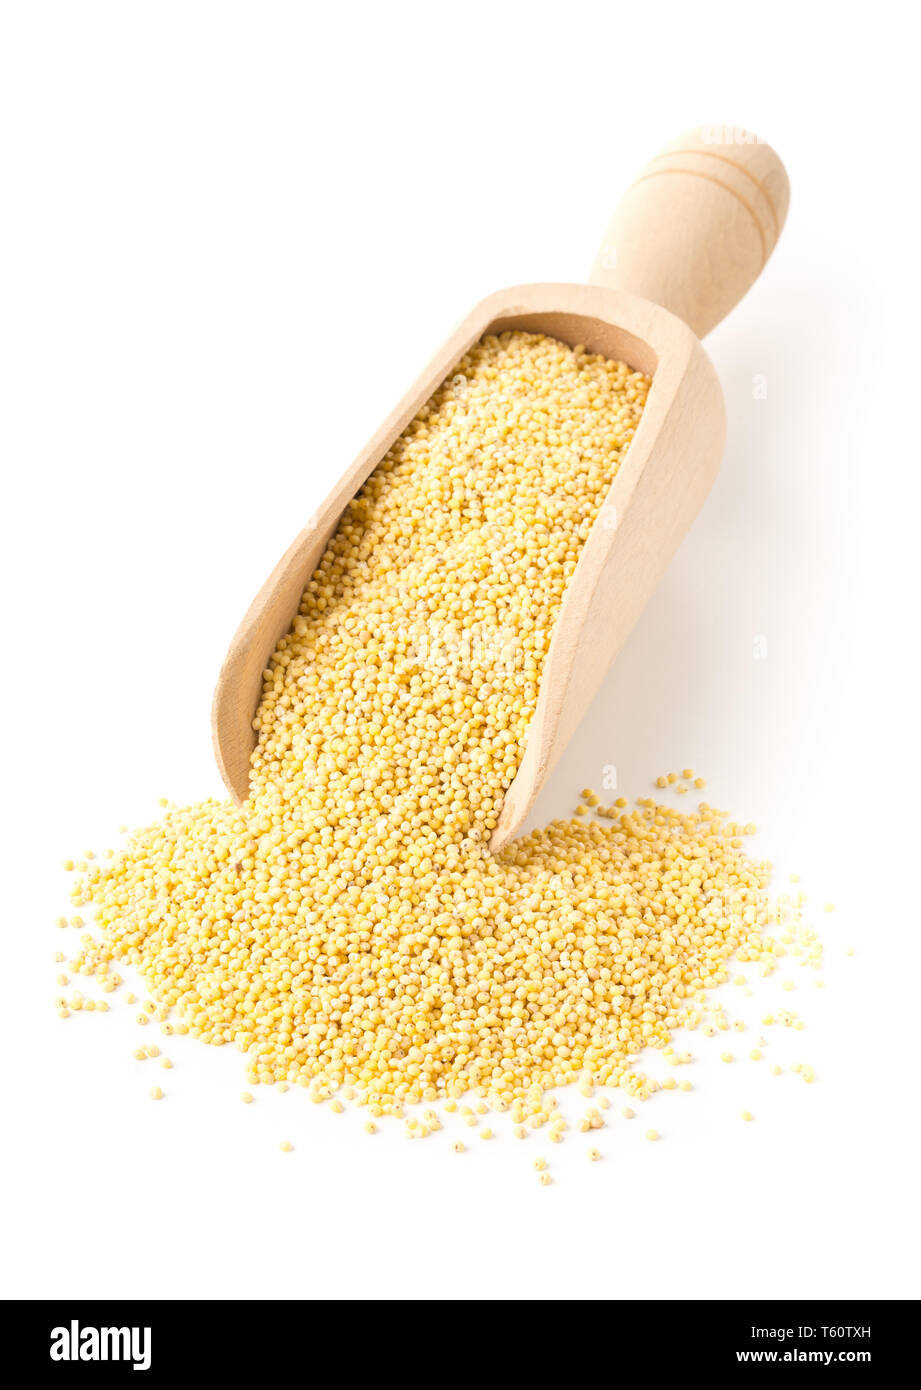 Pile of golden millet, a gluten free grain seed, in wooden scoop over white background Stock Photo